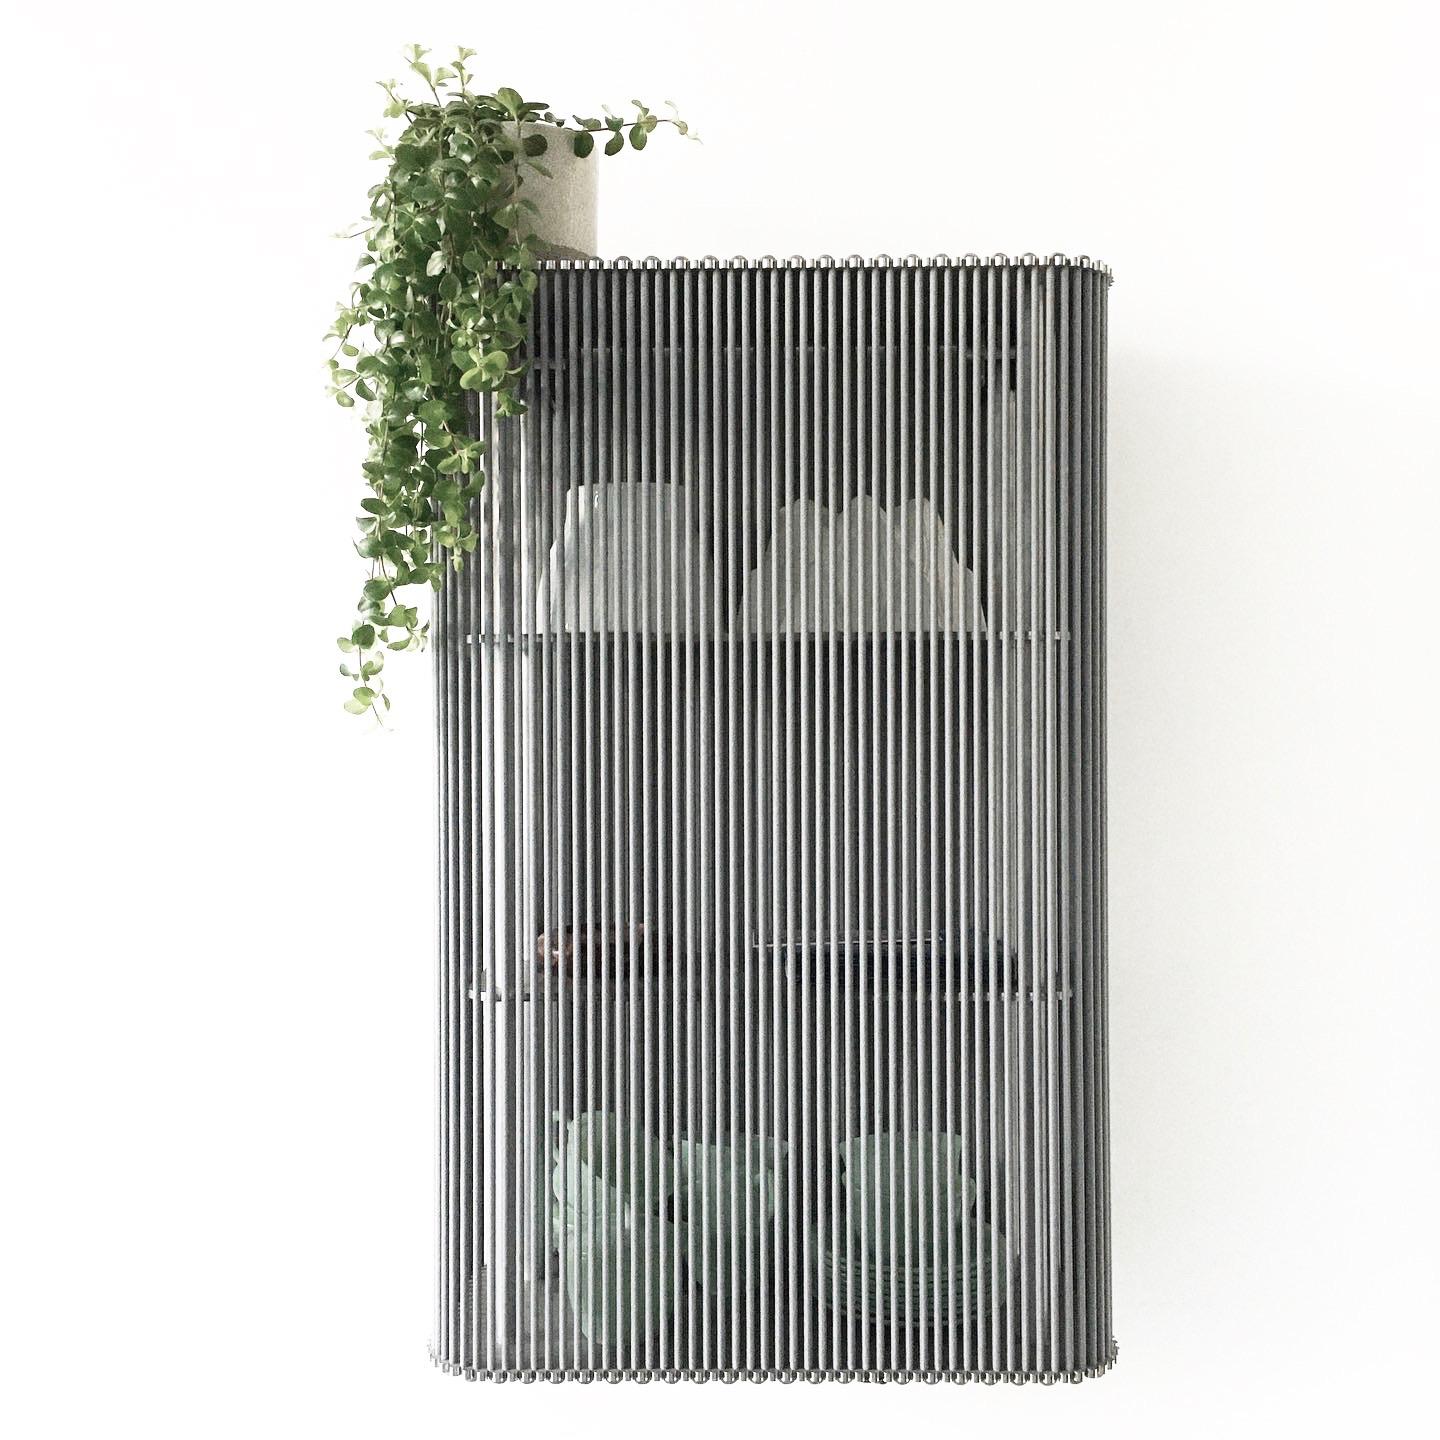 Coil cabinet wall mounted by Bram Kerkhofs
Dimensions: D50 x W25 x H75cm
Materials:Stainless steel, aluminium, elastic rope (natural rubber, polyethylene).

Other dimensions are available.

COIL is a modular cabinet system in which the ‘shell’